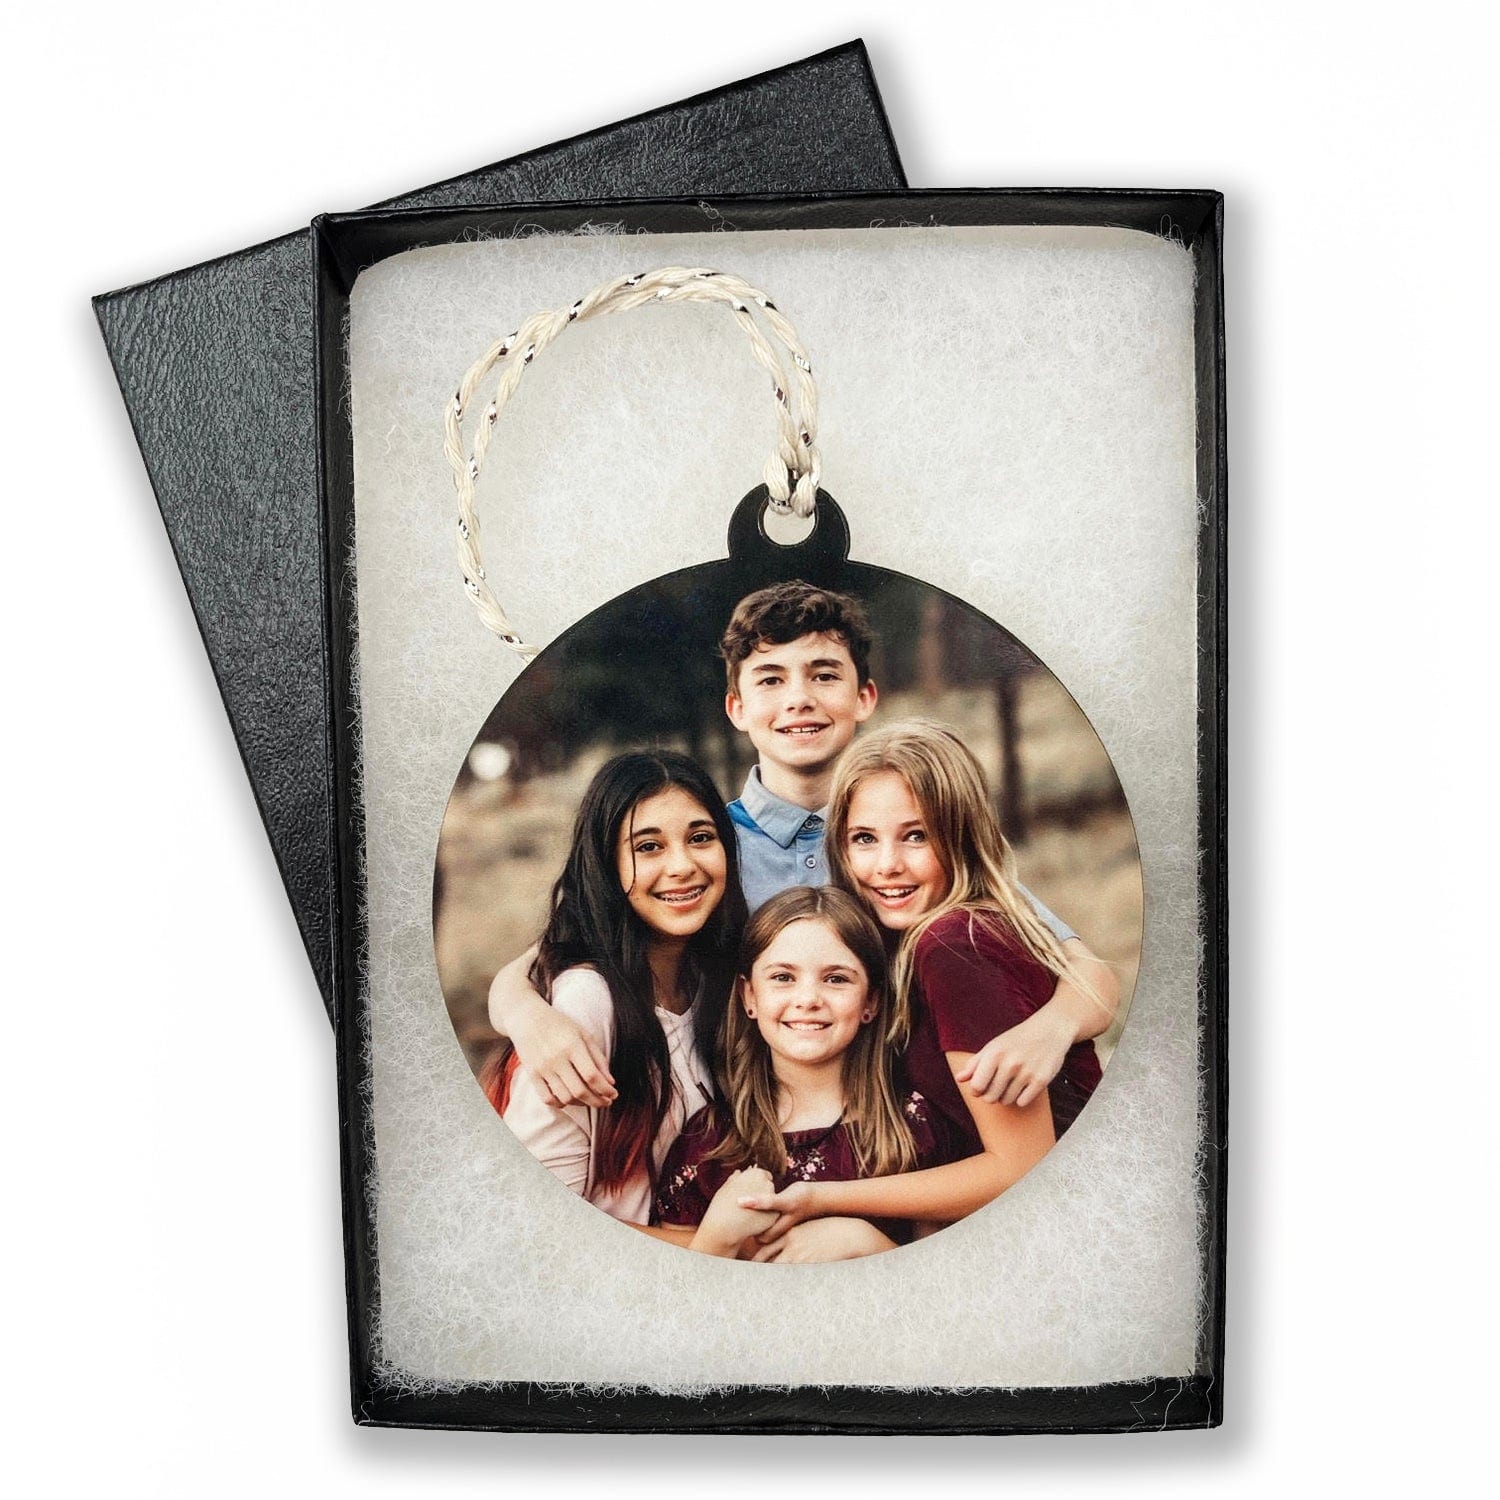 Your Photo Customized Christmas Ornament